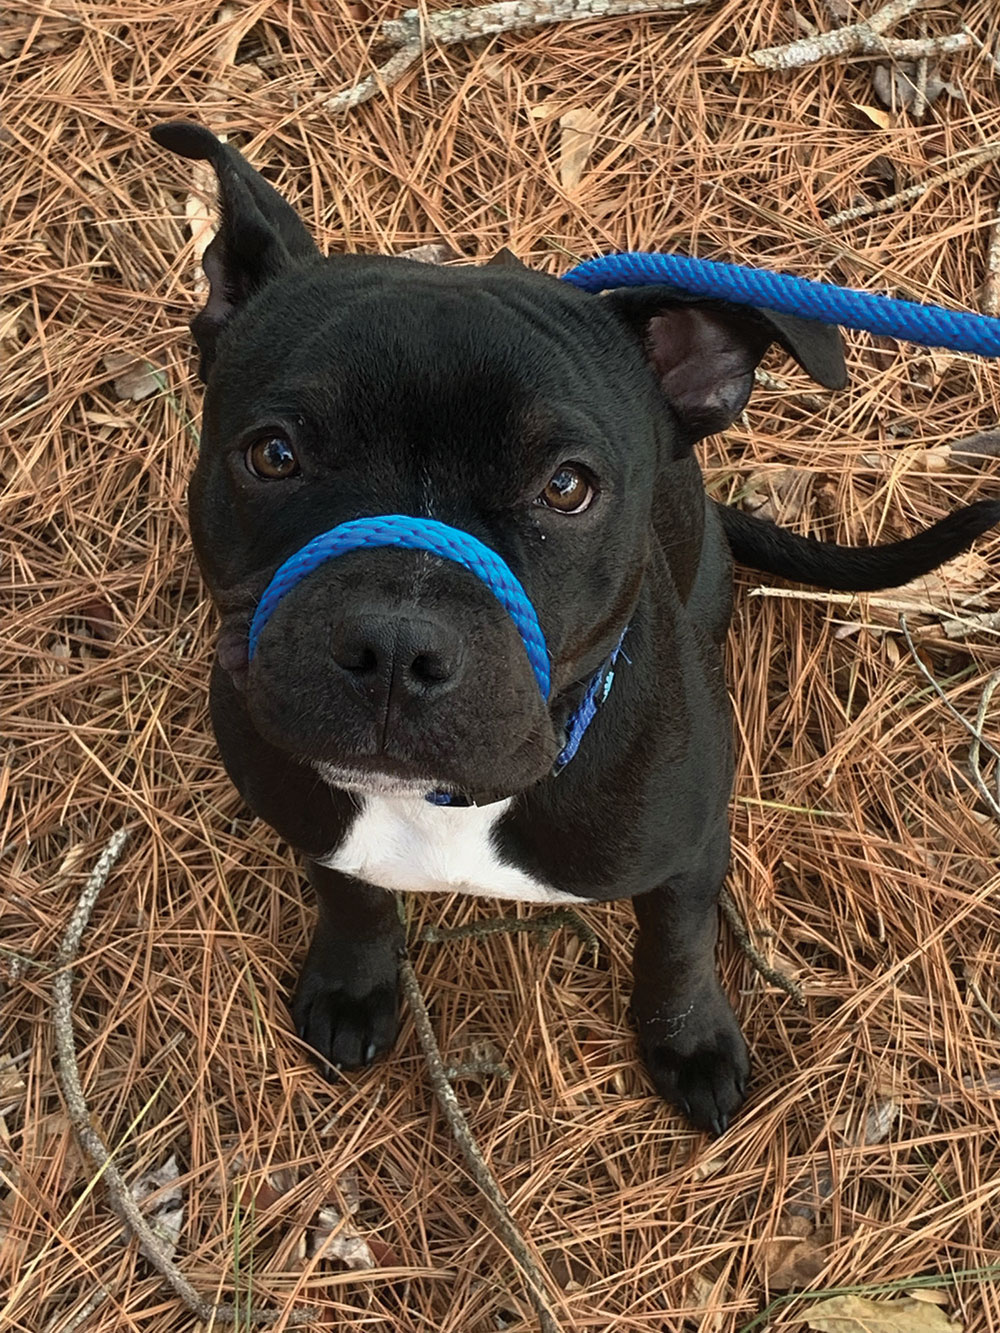 Piglet is a 2-year-old pocket pit mix. Piglet loves to snuggle, sleep in late, and do zoomies with his partner in crime, Kitsune. Submitted by Trisha.